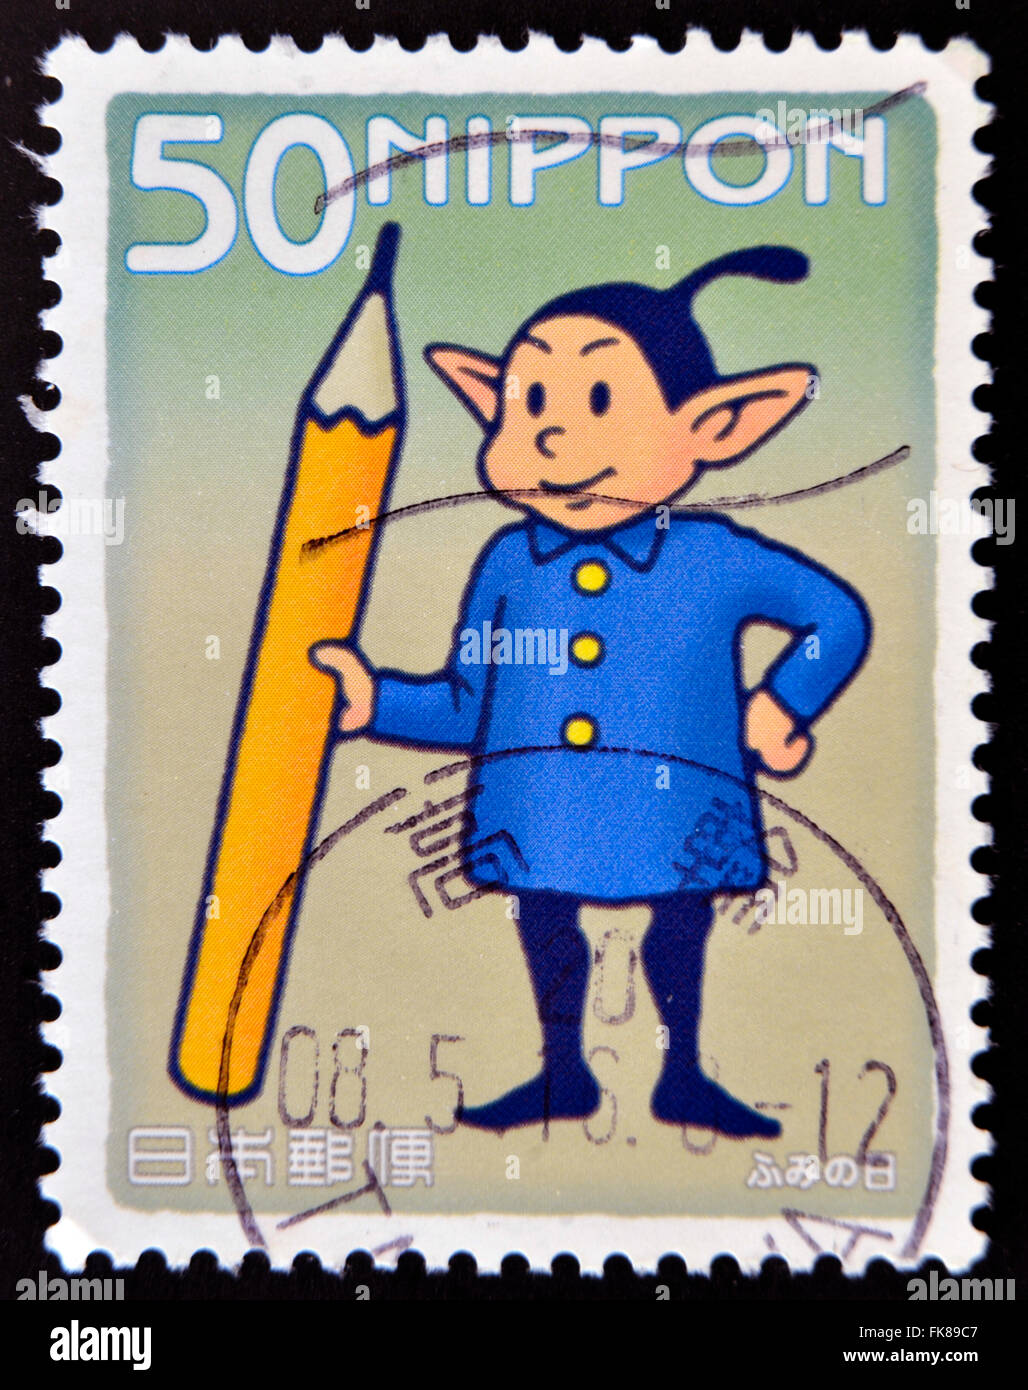 JAPAN - CIRCA 2004: A stamp printed in Japan shows Little Elf with a pencil, circa 2004 Stock Photo